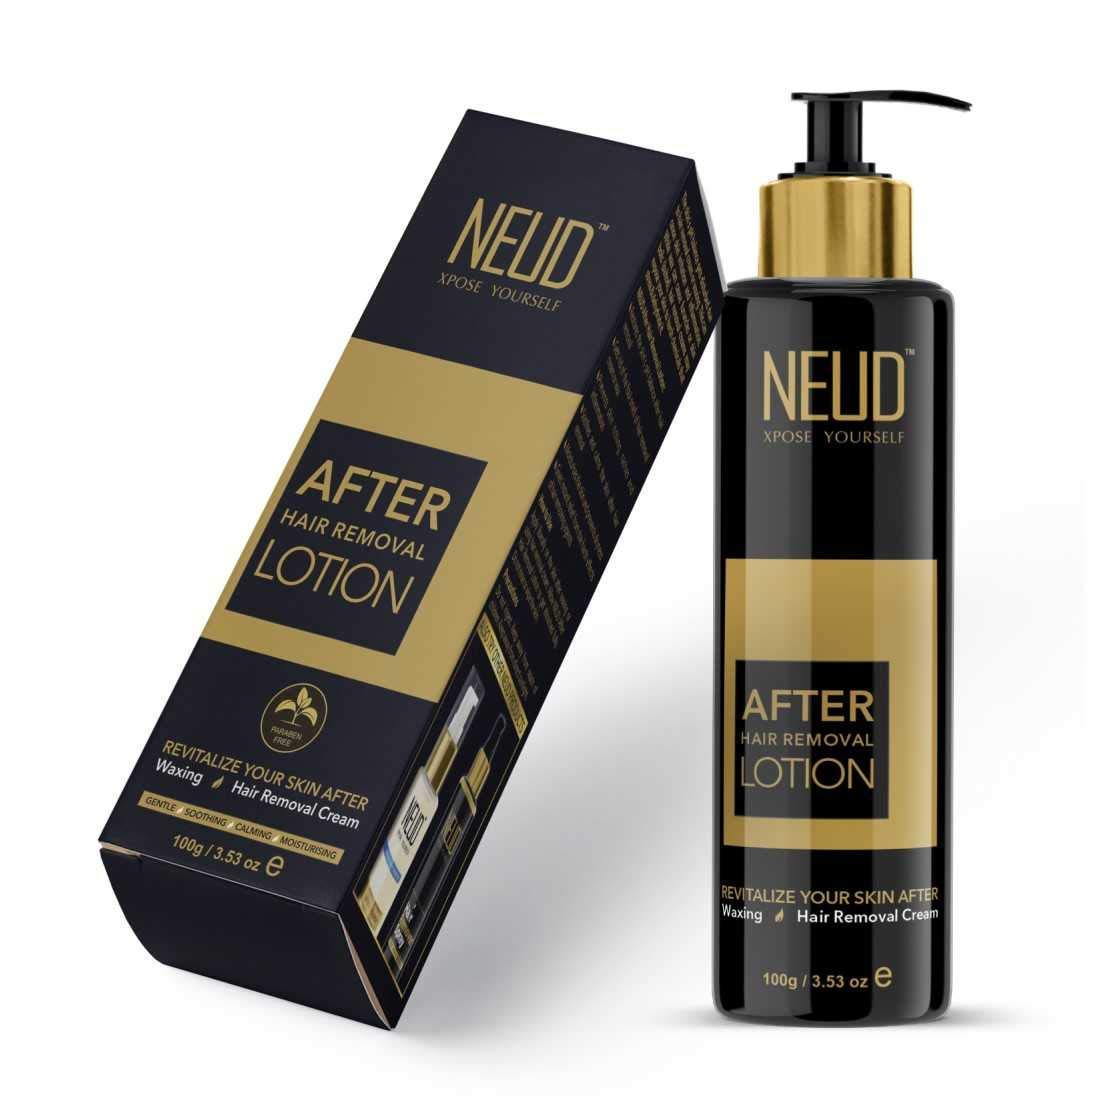 NEUD After Hair Removal Lotion for Skin Care in Men & Women- 3.5 Oz (100g)